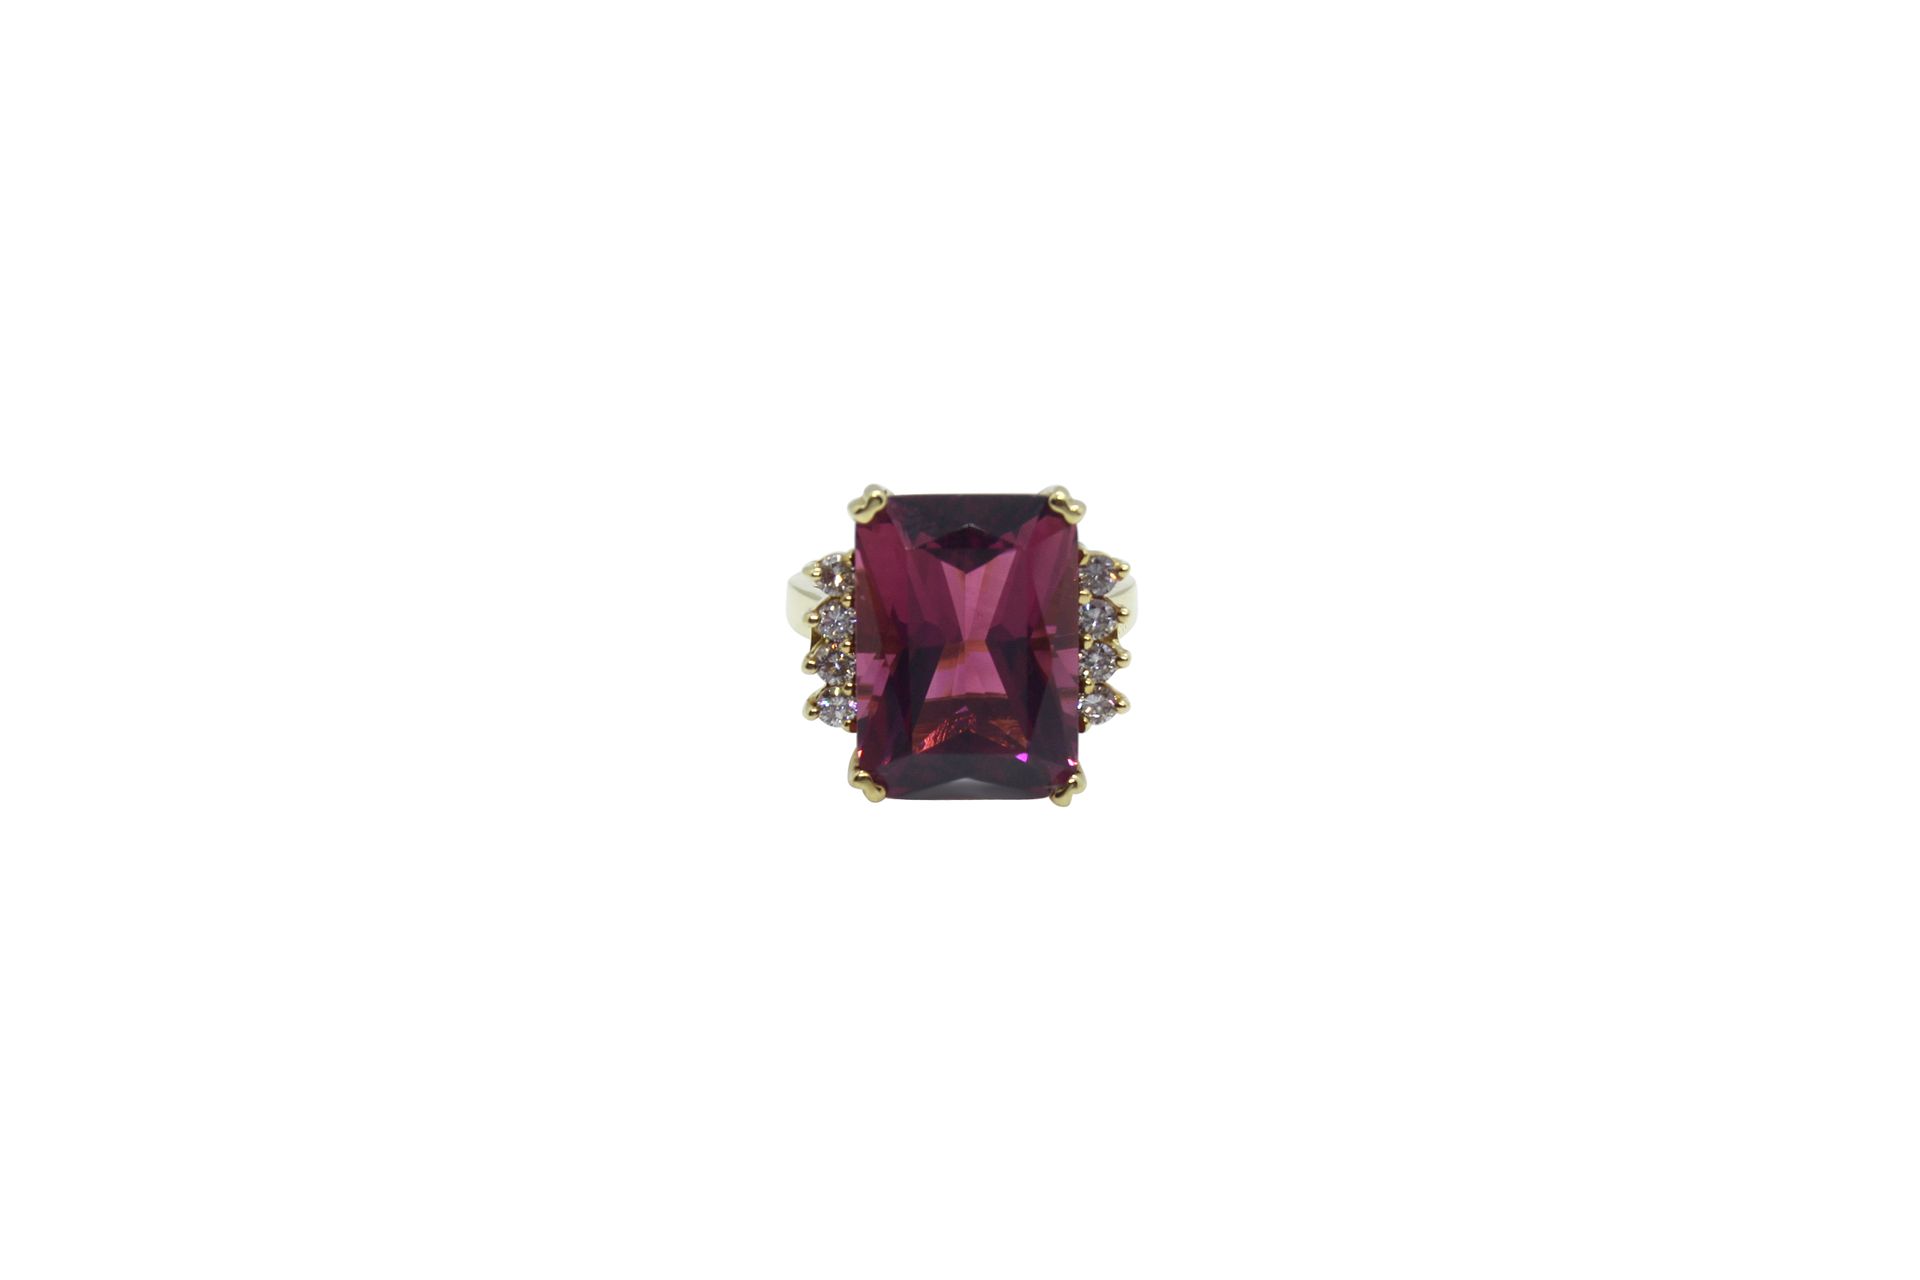 18k gold ring with synthetic purple stone Ring aus 18k Gold mit synthetischem li&hellip;